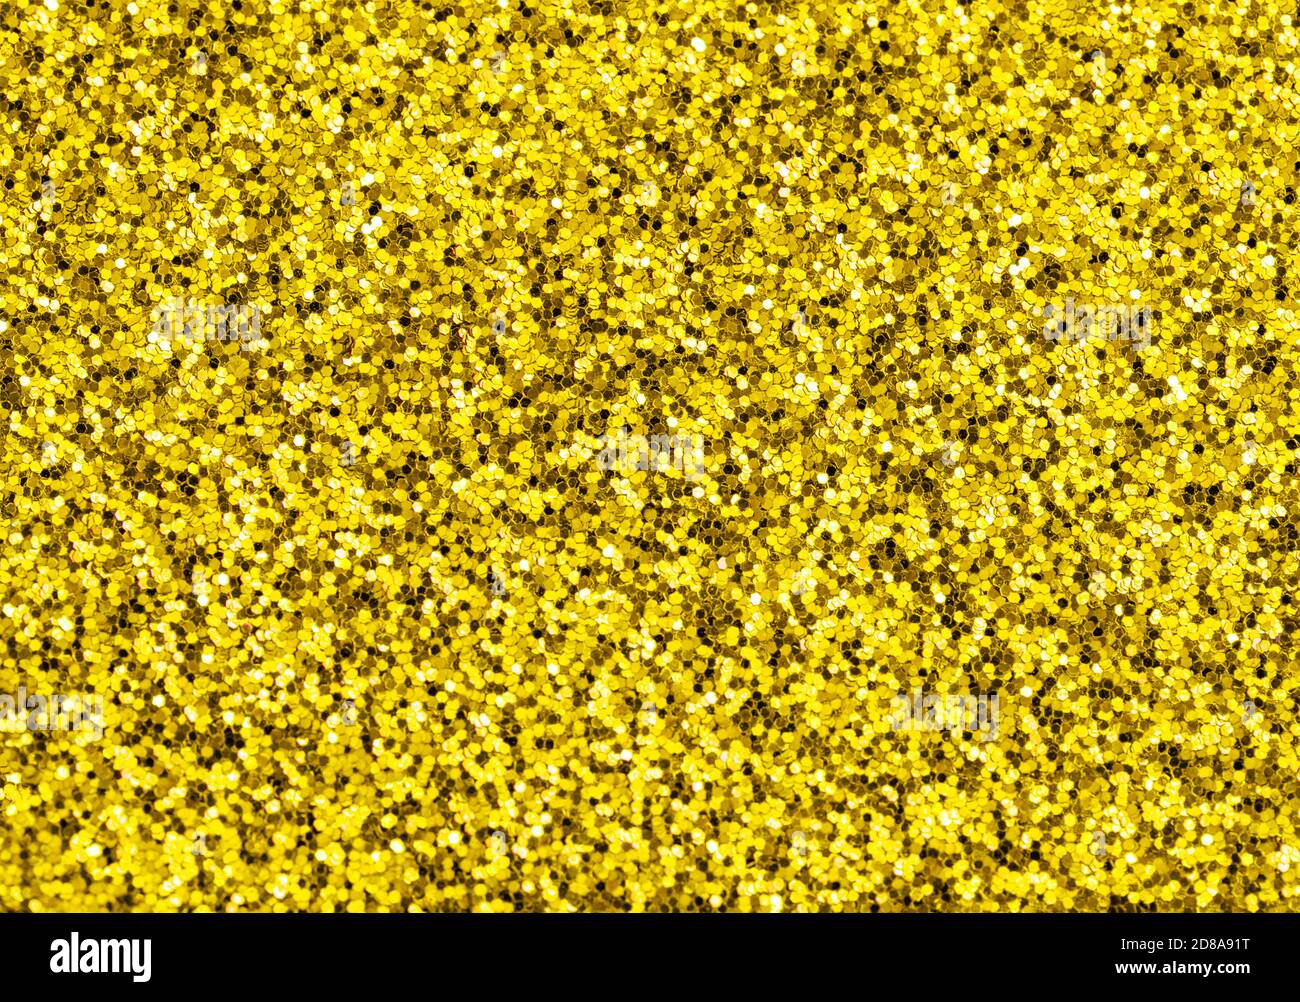 Shiny festive golden shimmer background texture. Glitter and glow Stock Photo